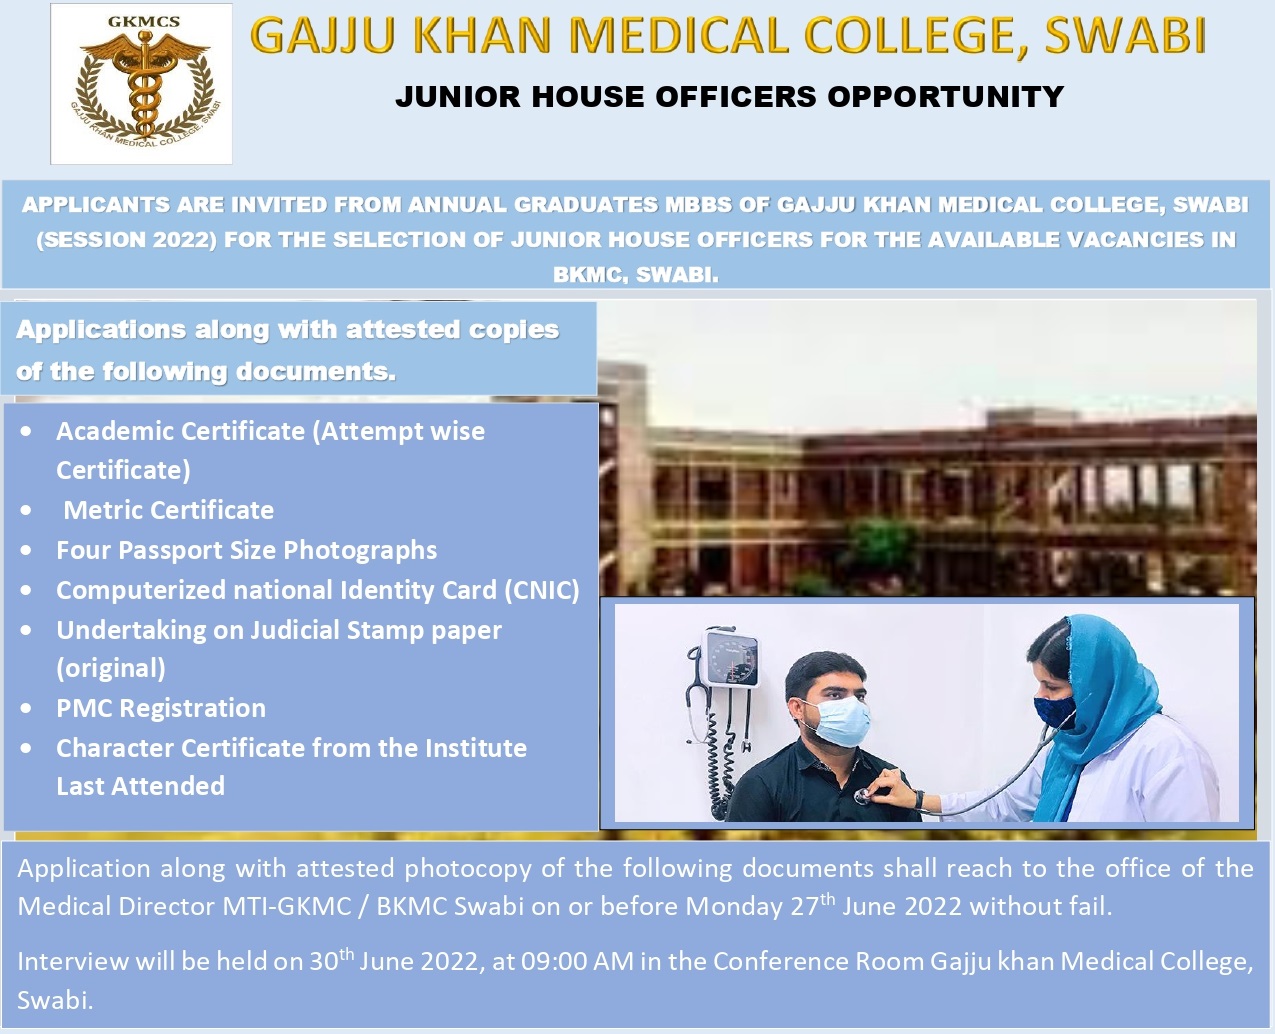 APPLICANTS ARE INVITED FROM ANNUAL GRADUATES MBBS OF GAJJU KHAN MEDICAL COLLEGE, SWABI (SESSION 2022) FOR THE SELECTION OF JUNIOR HOUSE OFFICERS FOR THE AVAILABLE VACANCIES IN BKMC, SWABI.